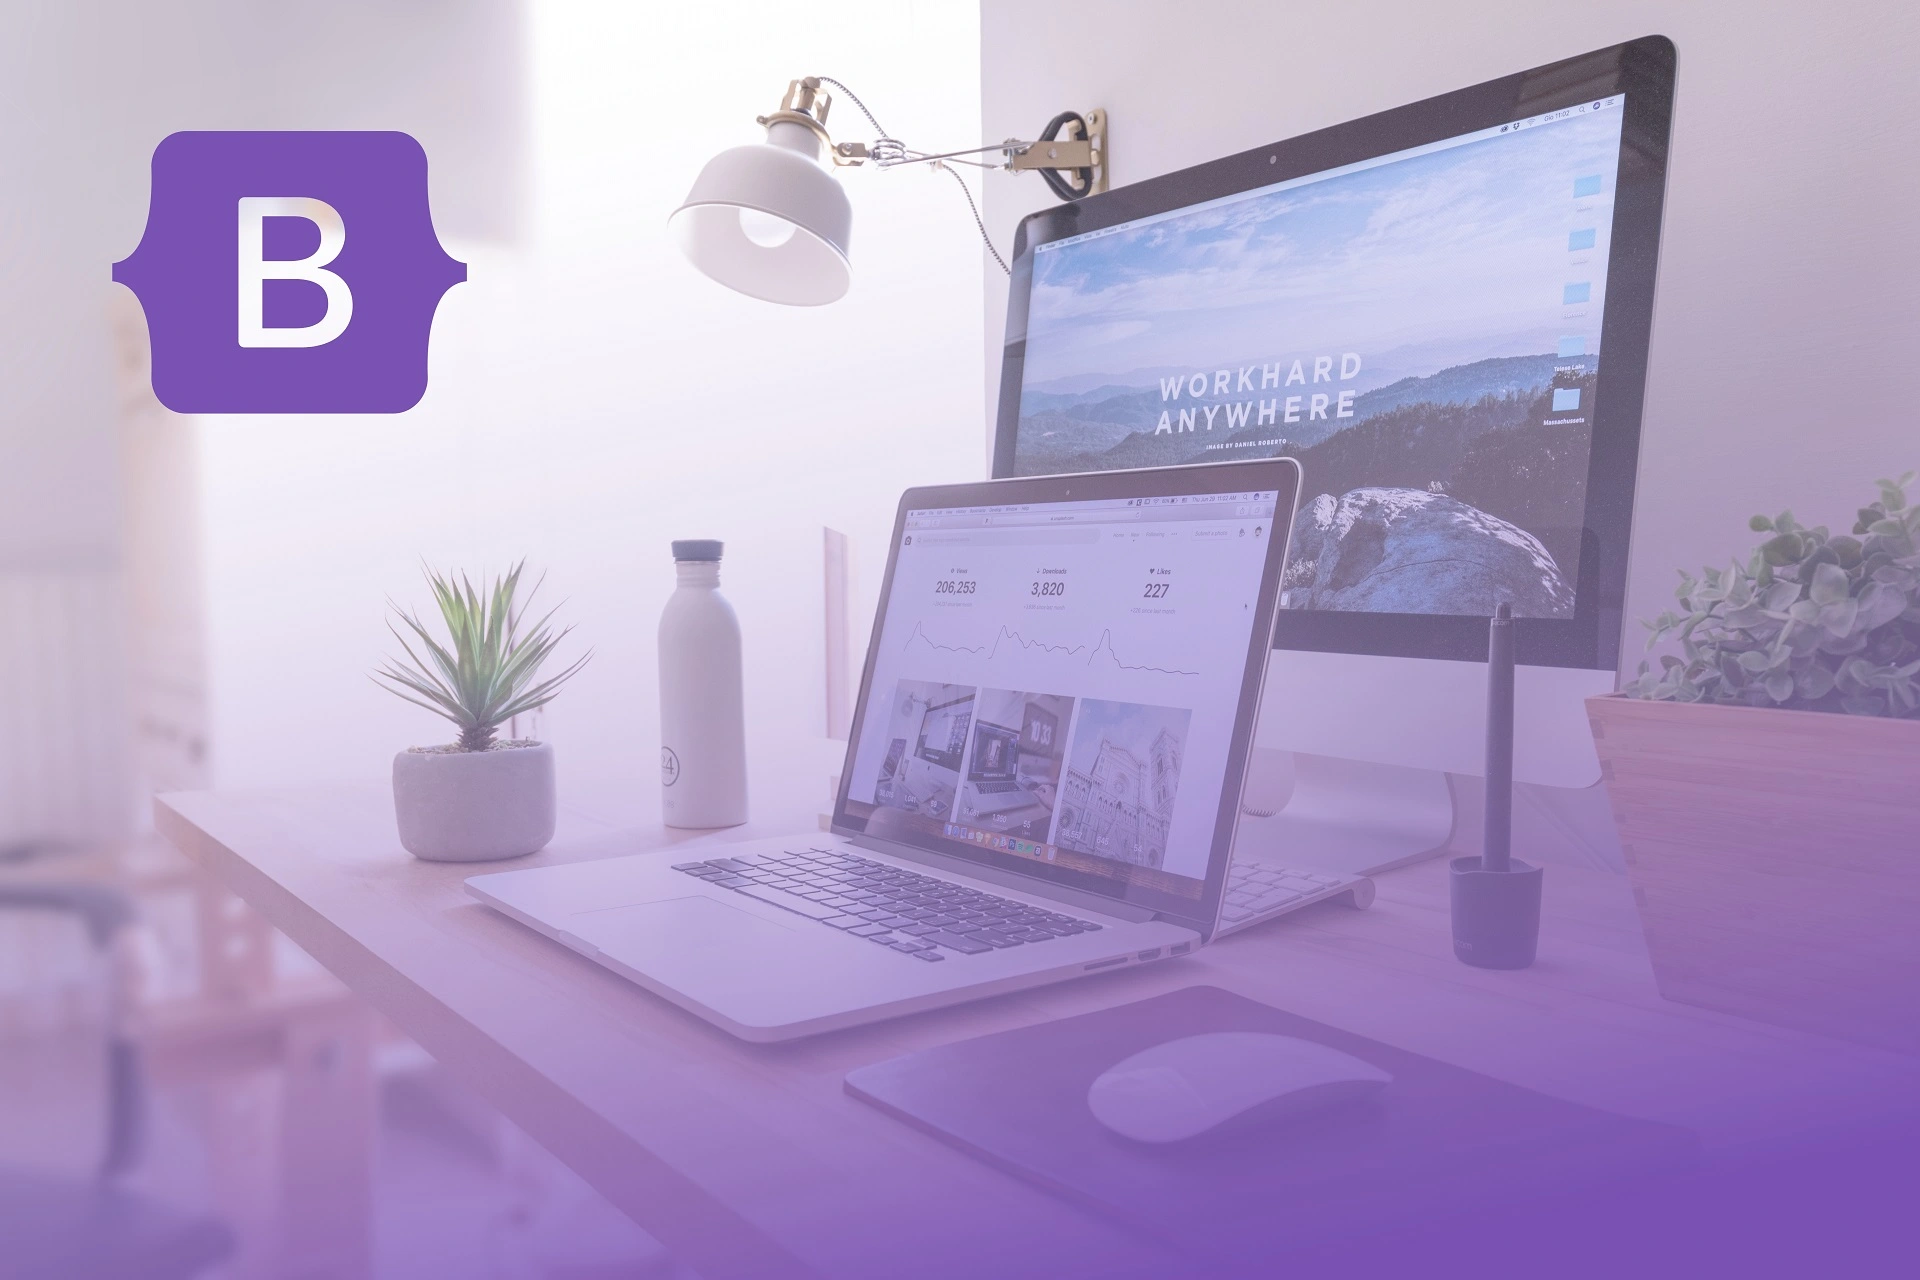 9 New Features To Look Out For In Bootstrap 5 [Update]